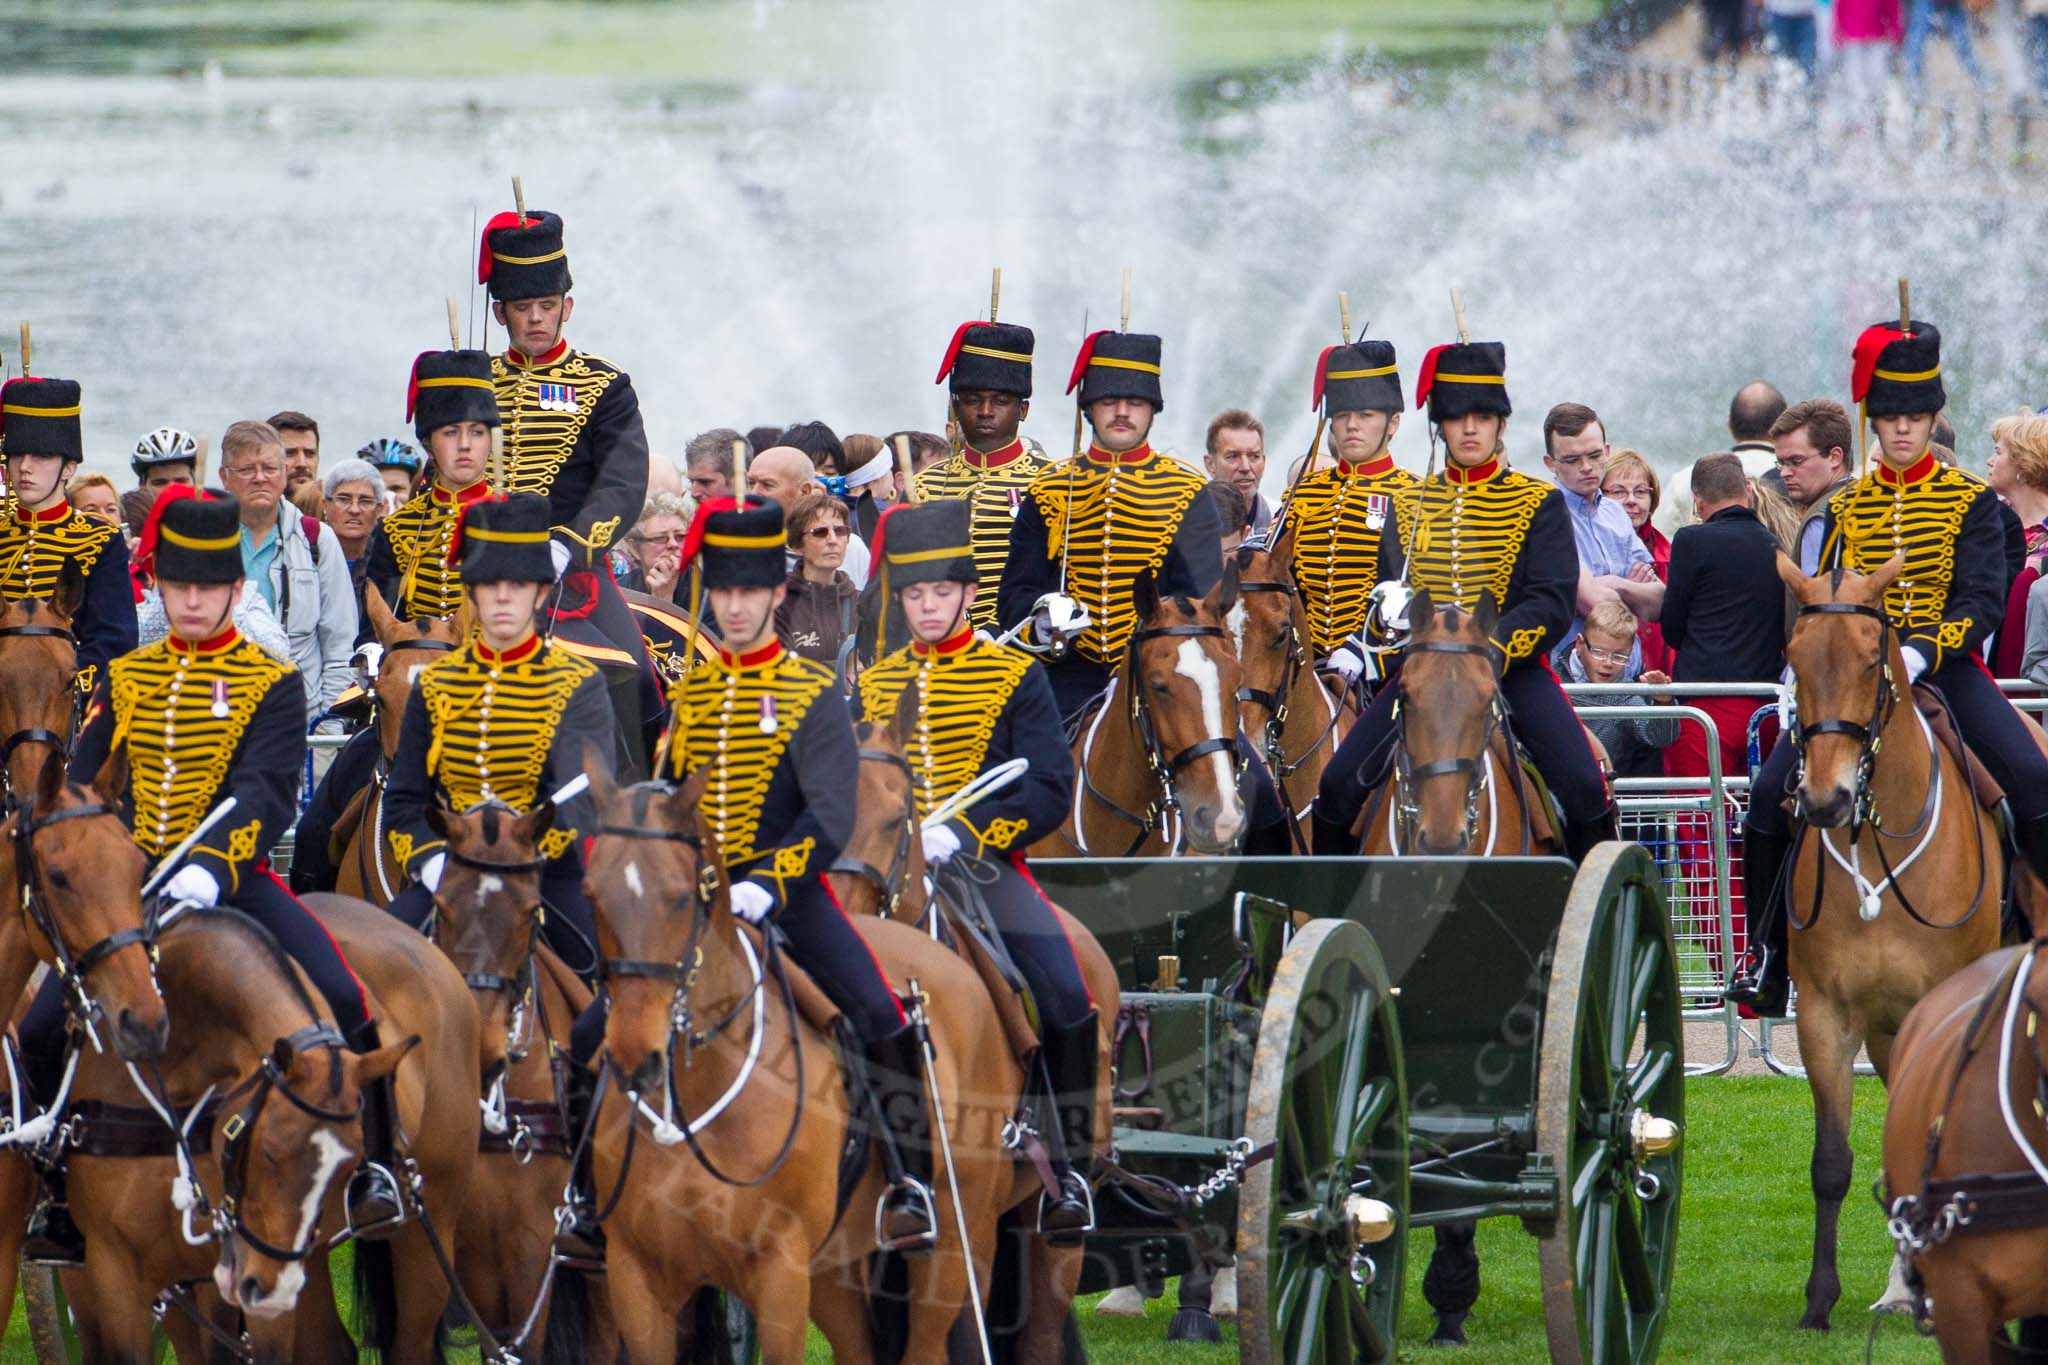 Major General's Review 2013: The King's Troop Royal Horse Artillery..
Horse Guards Parade, Westminster,
London SW1,

United Kingdom,
on 01 June 2013 at 11:17, image #385